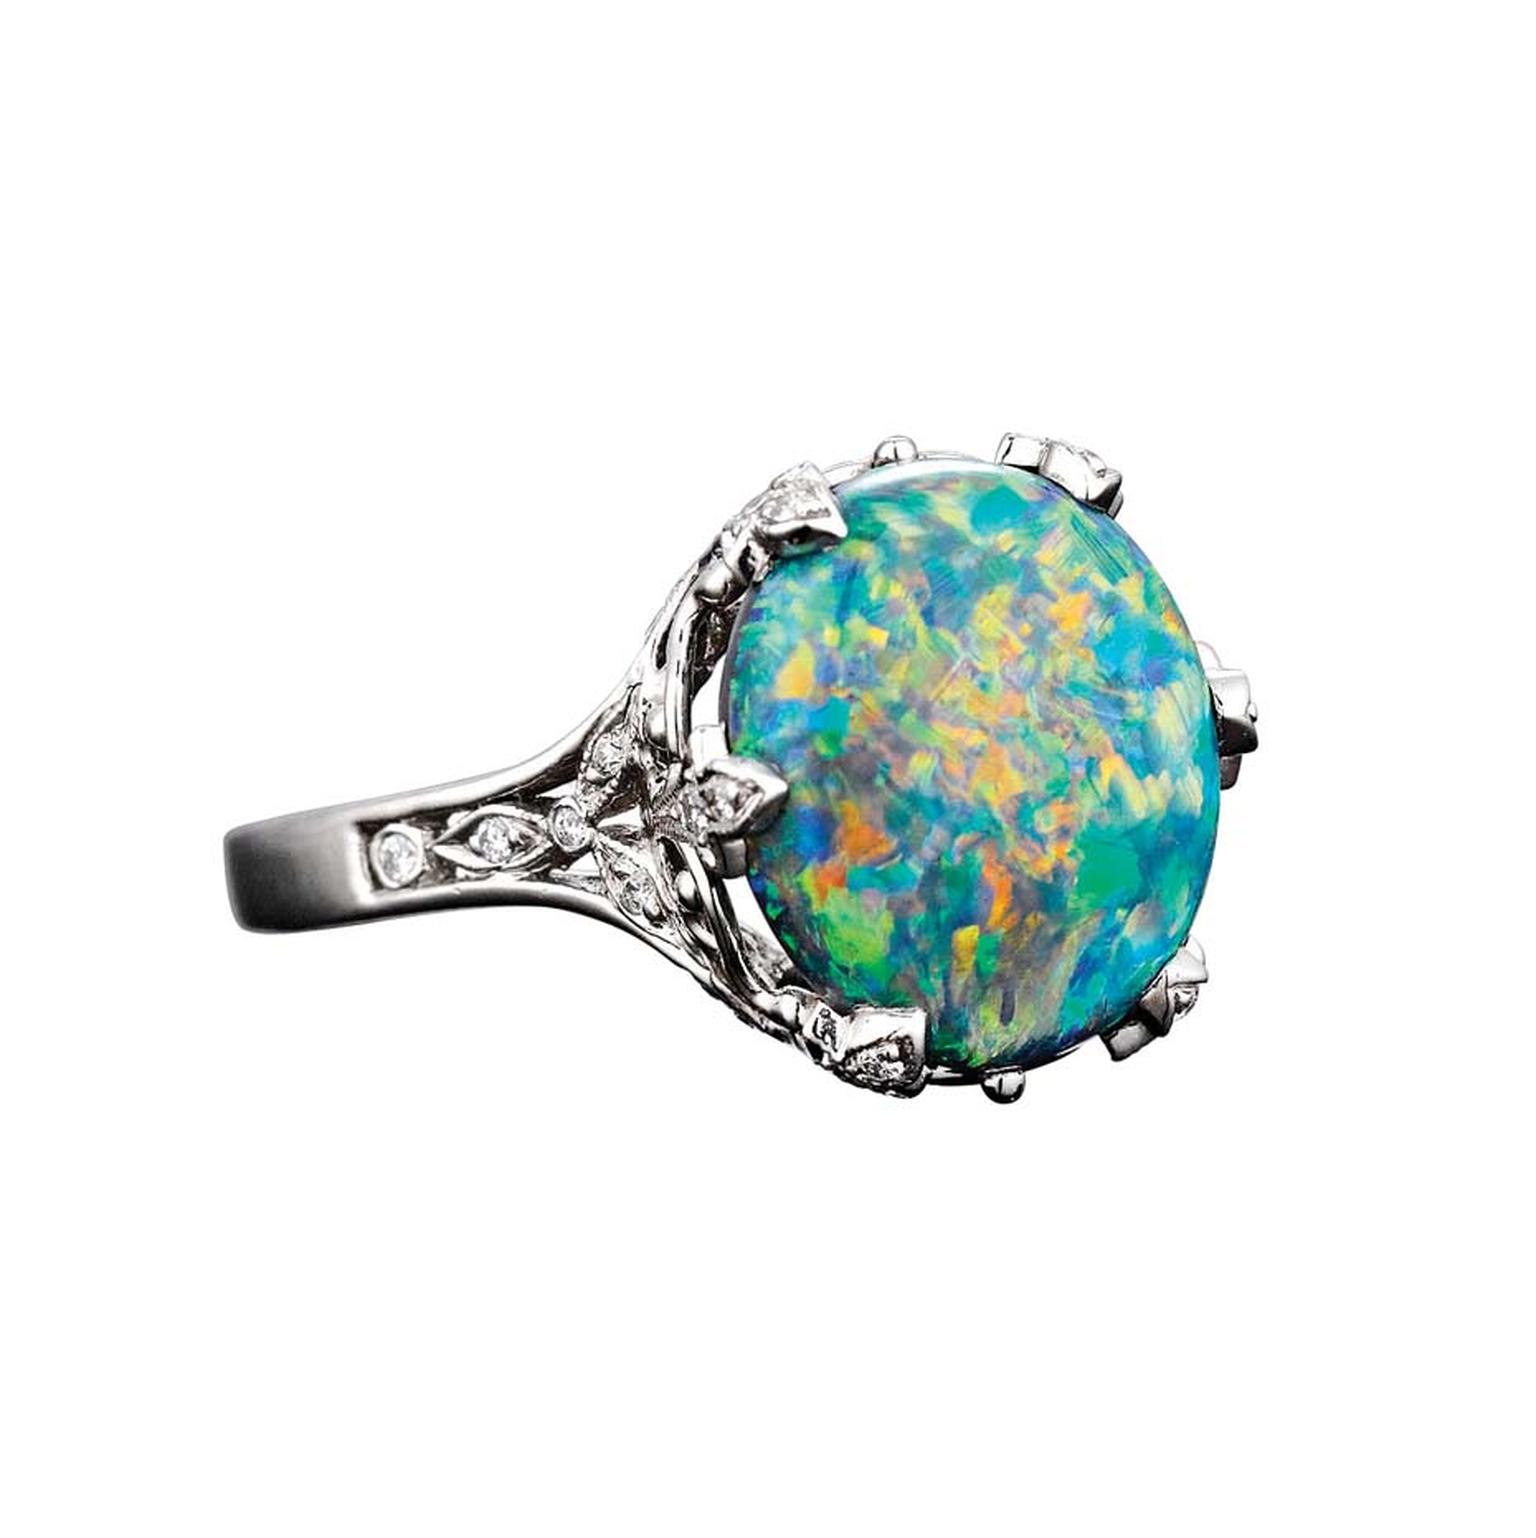 Tiffany & Co. ring in platinum, set with a 5.54ct black opal